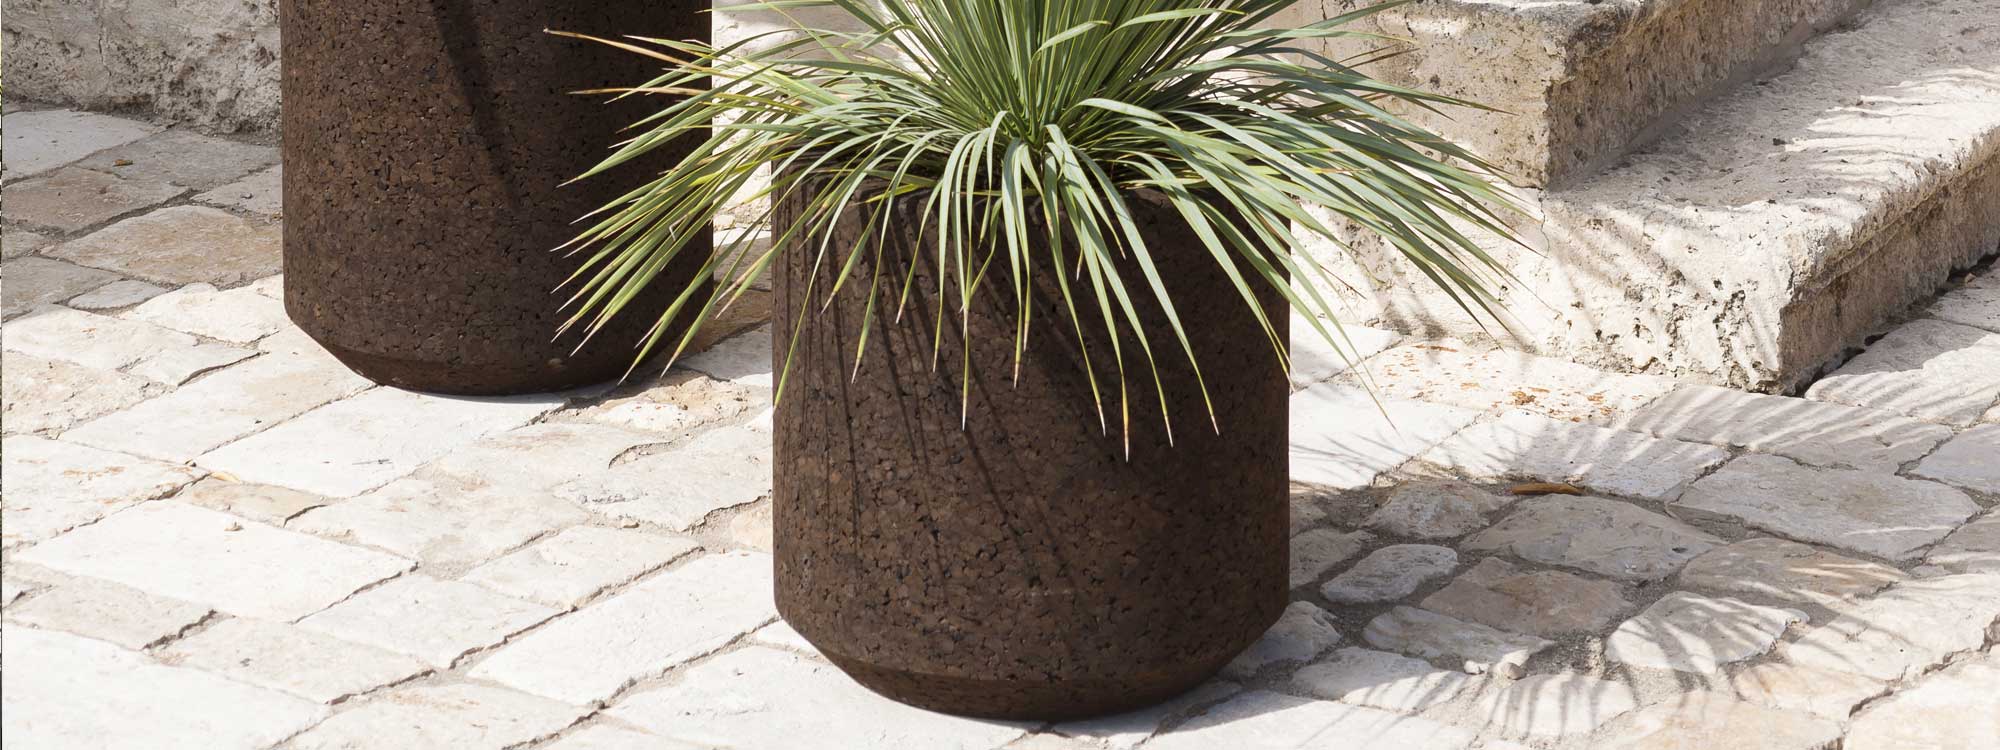 Cortica brown cork plant pot is a large modern planter made in natural planter materials by RODA sustainable planter company, Italy.